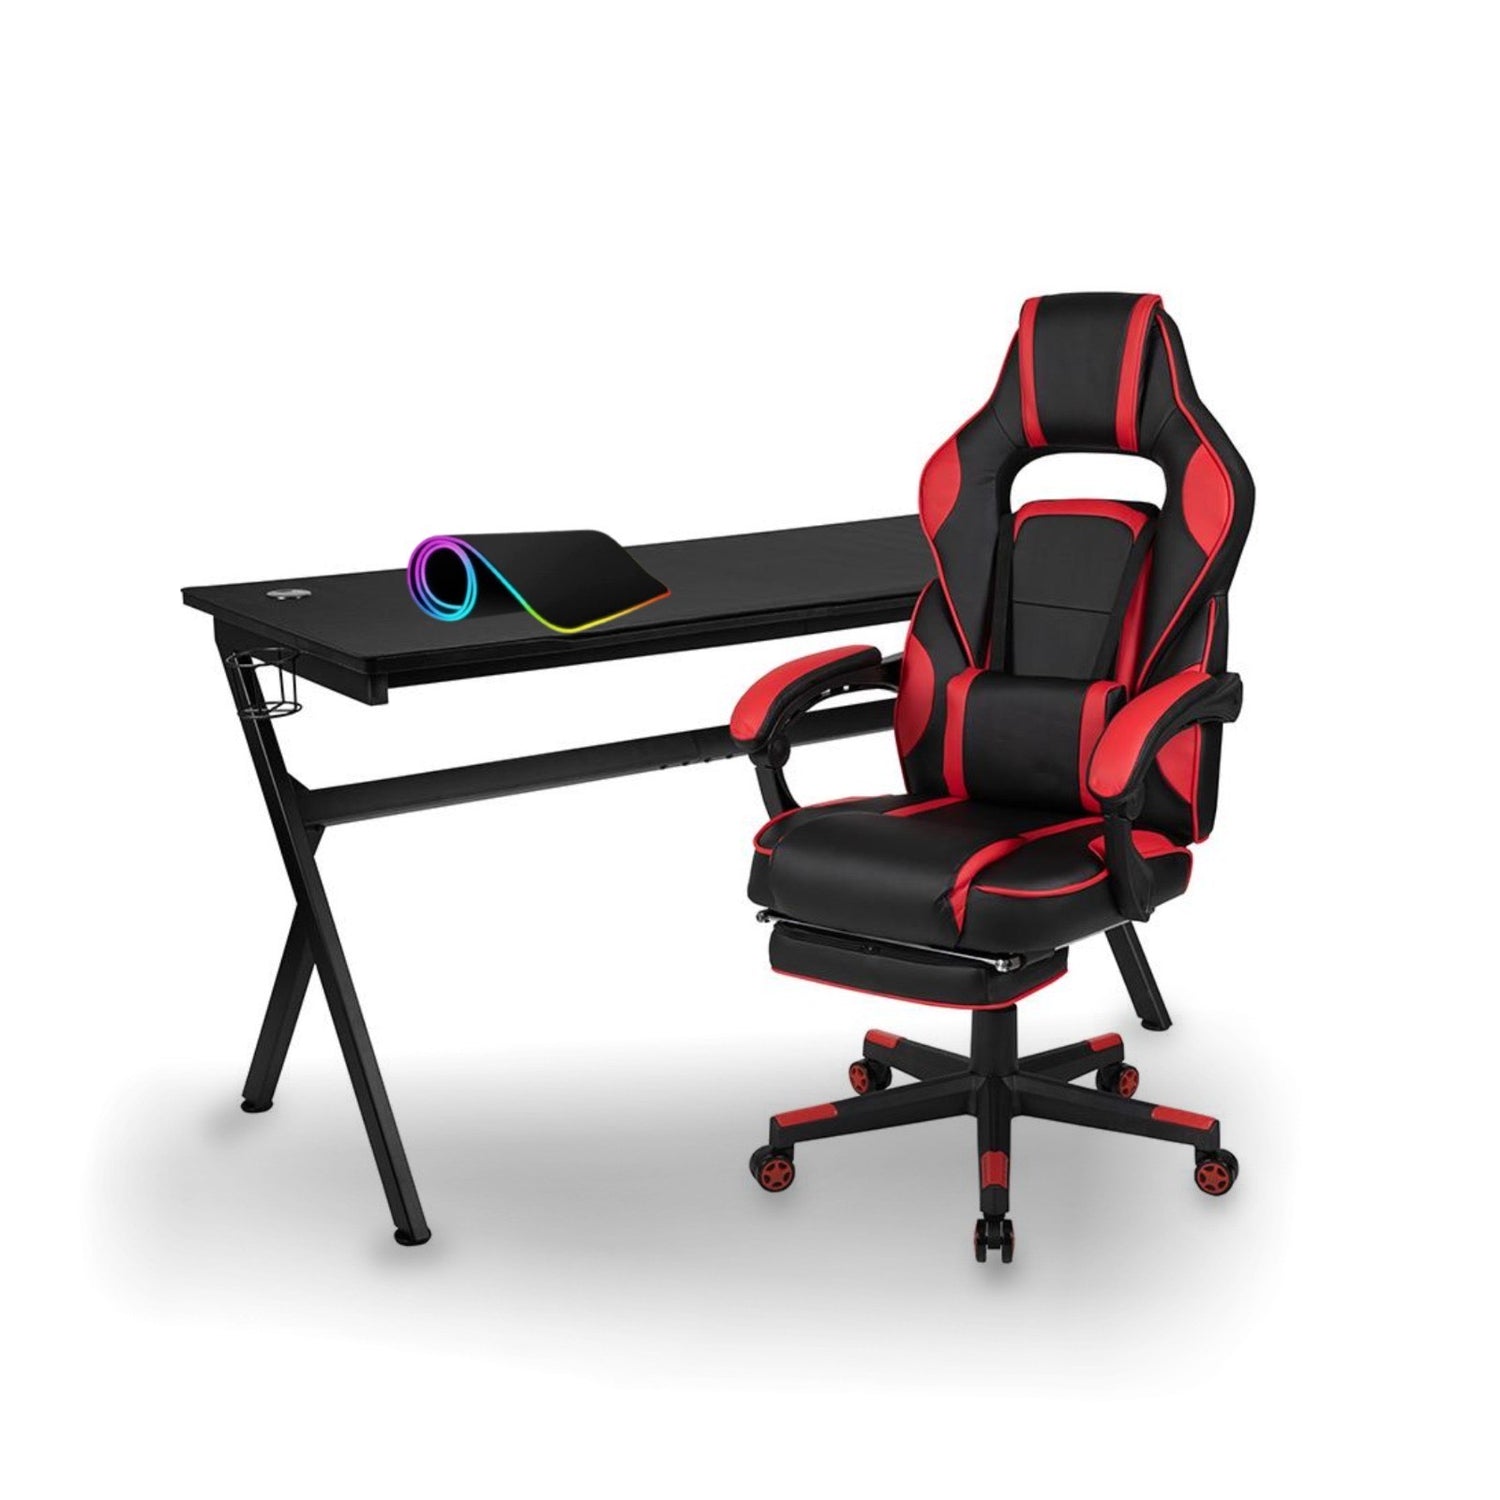 Ultimate Gaming and Office Combo - Ergonomic Artiss Office Chair, LED Gaming Desk, Large RGB Mouse Pad - Enhance Comfort, Style, and Performance with up to 15% Discount Bundlebo Special Deal